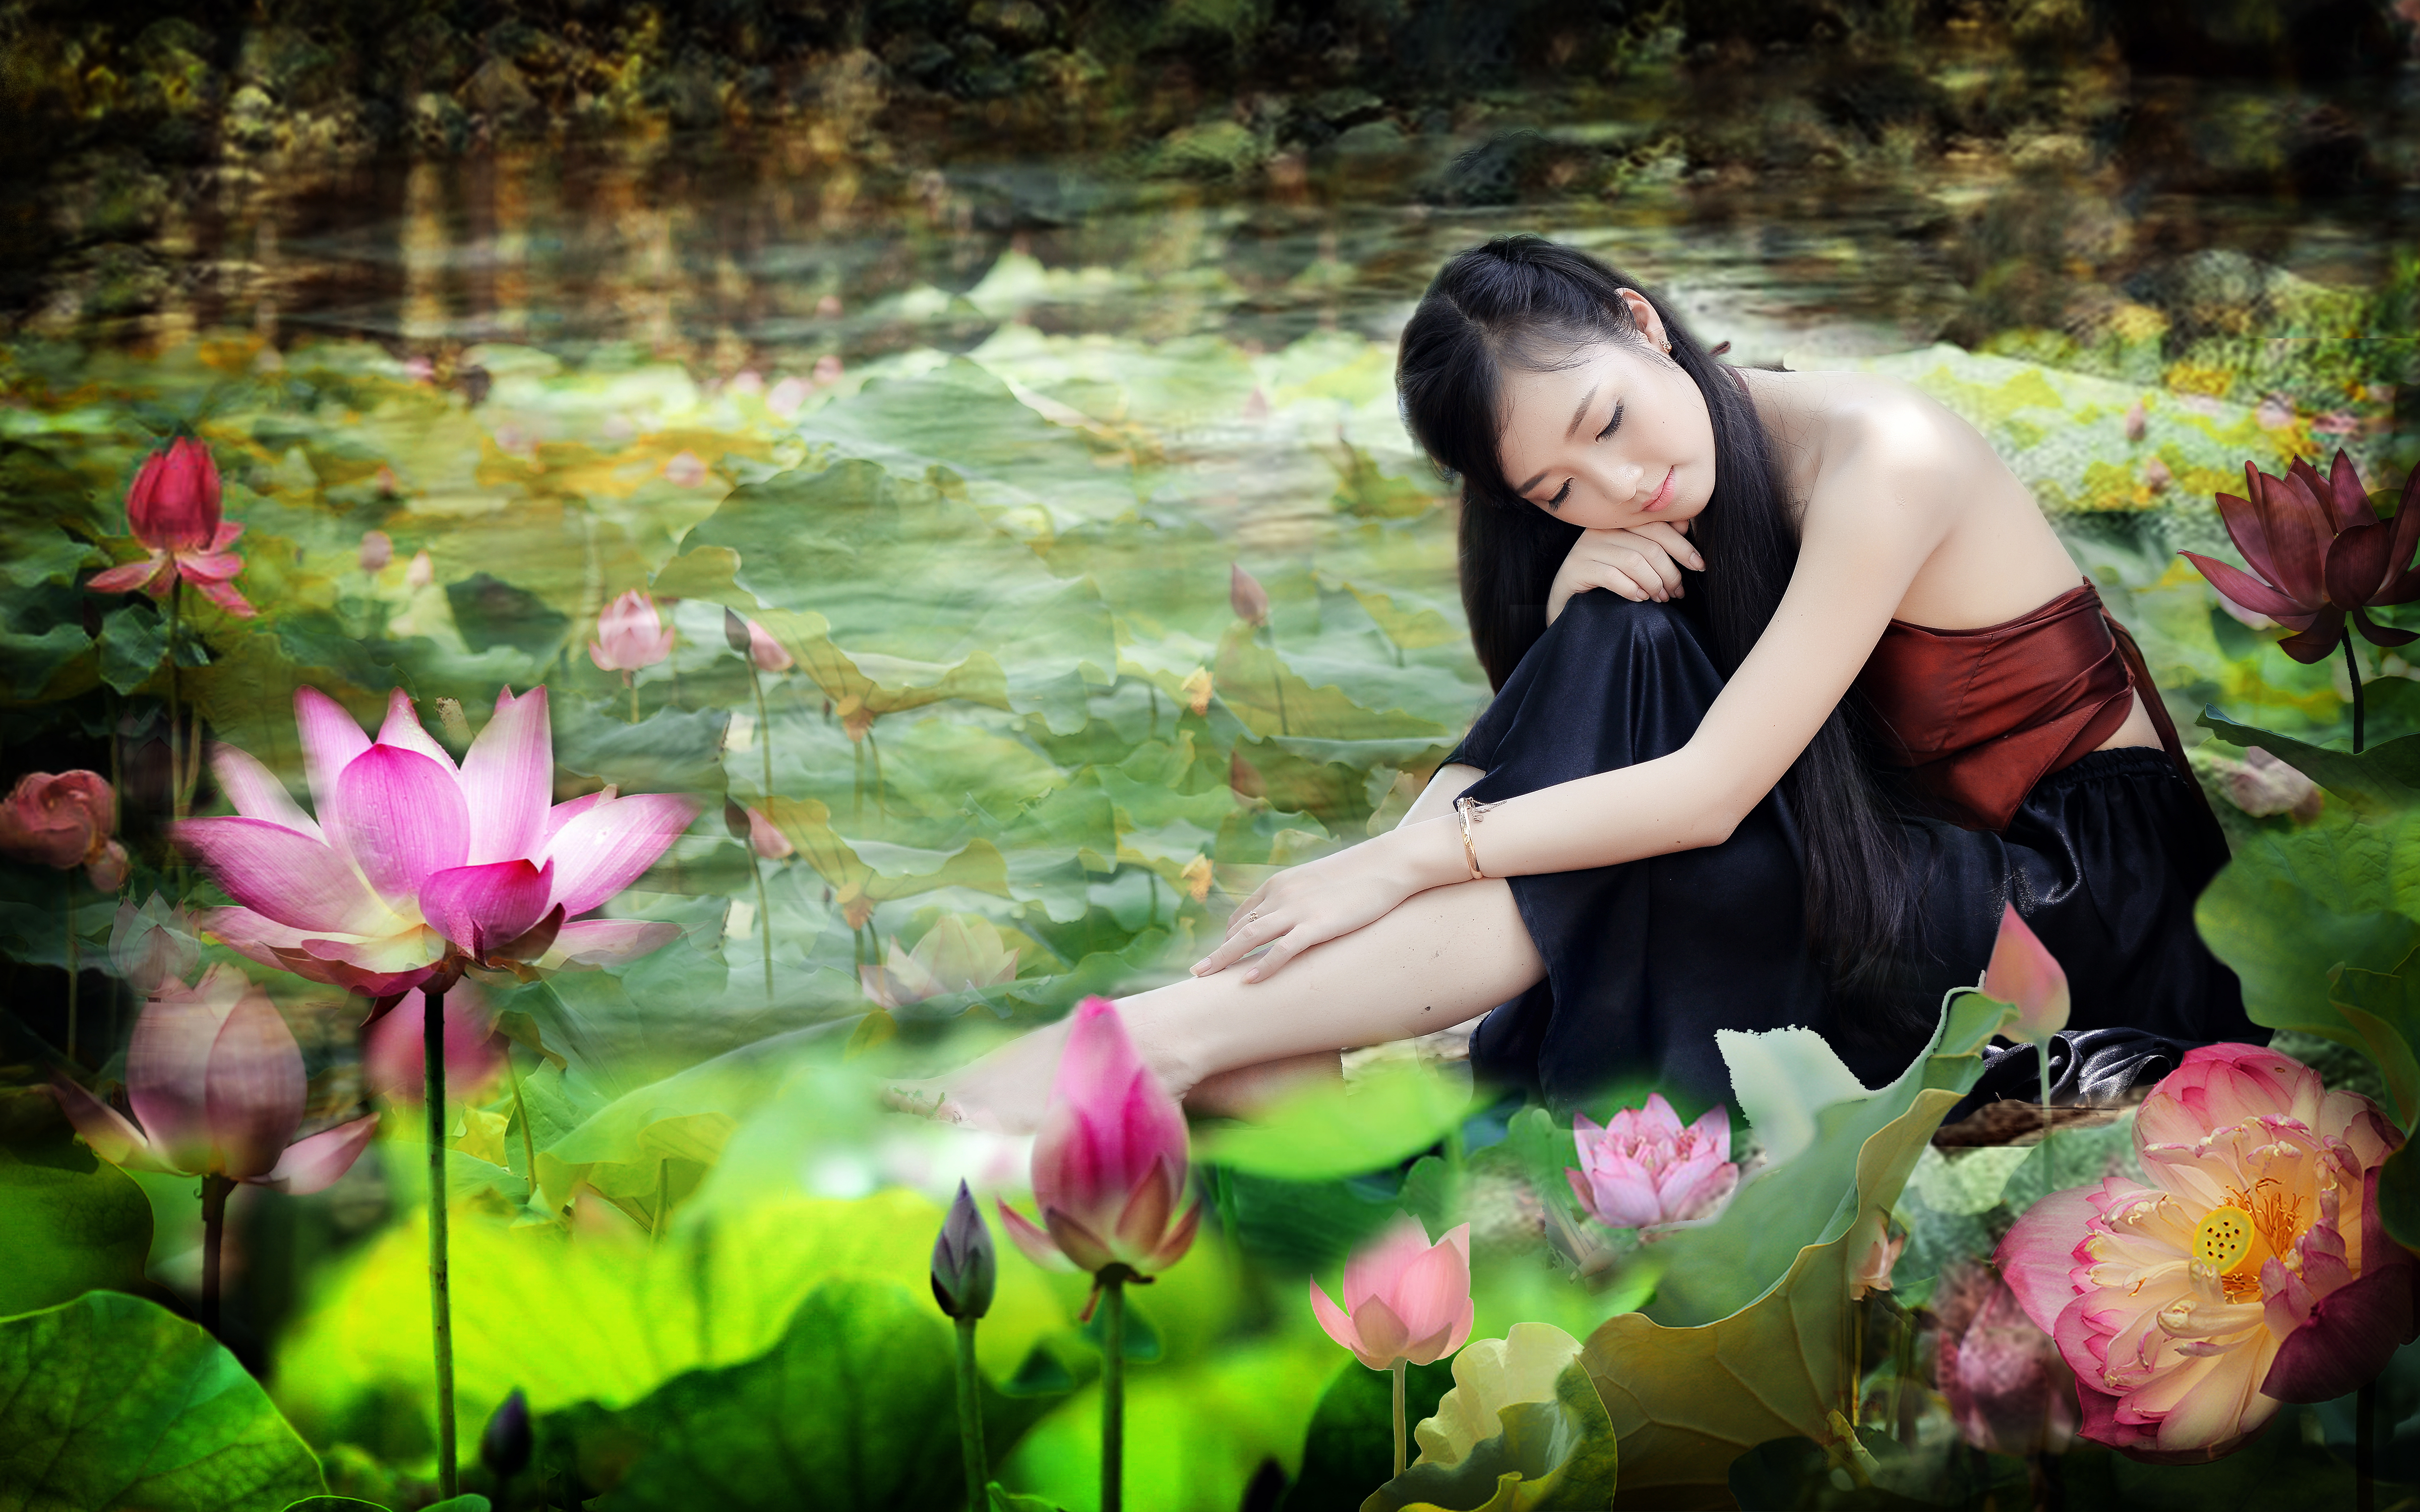 Lotus Flower With Girl - HD Wallpaper 